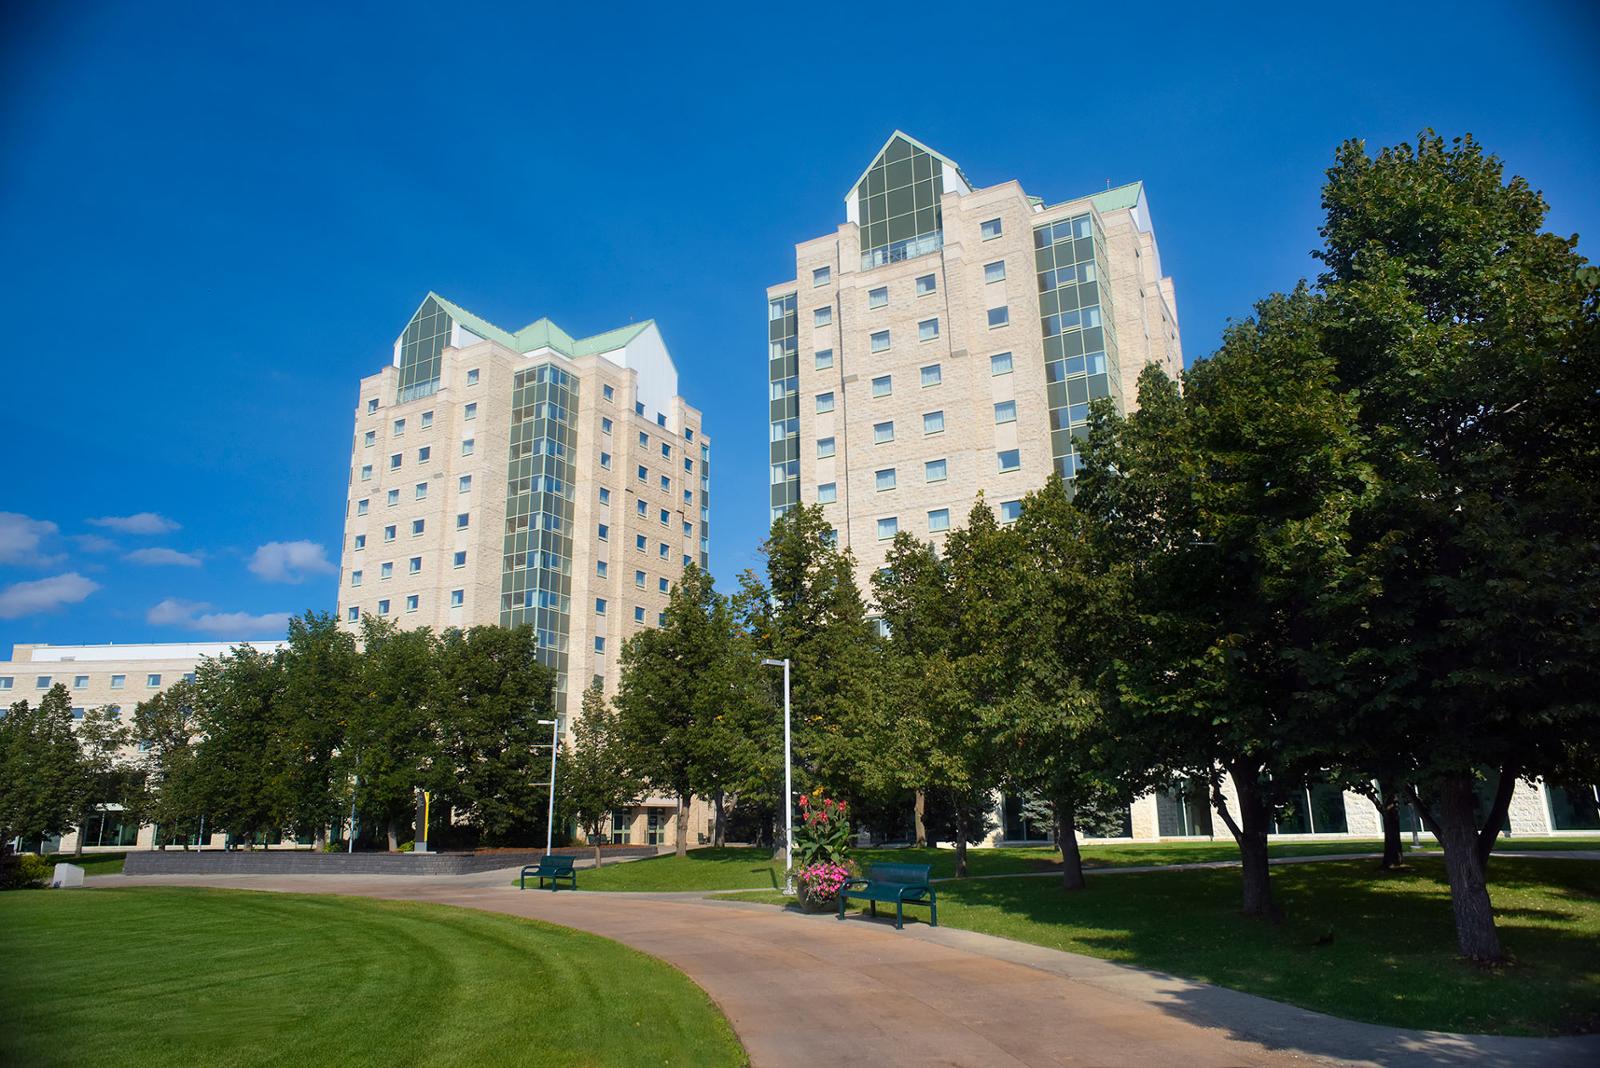 U of R residence towers on a sunny summer day.